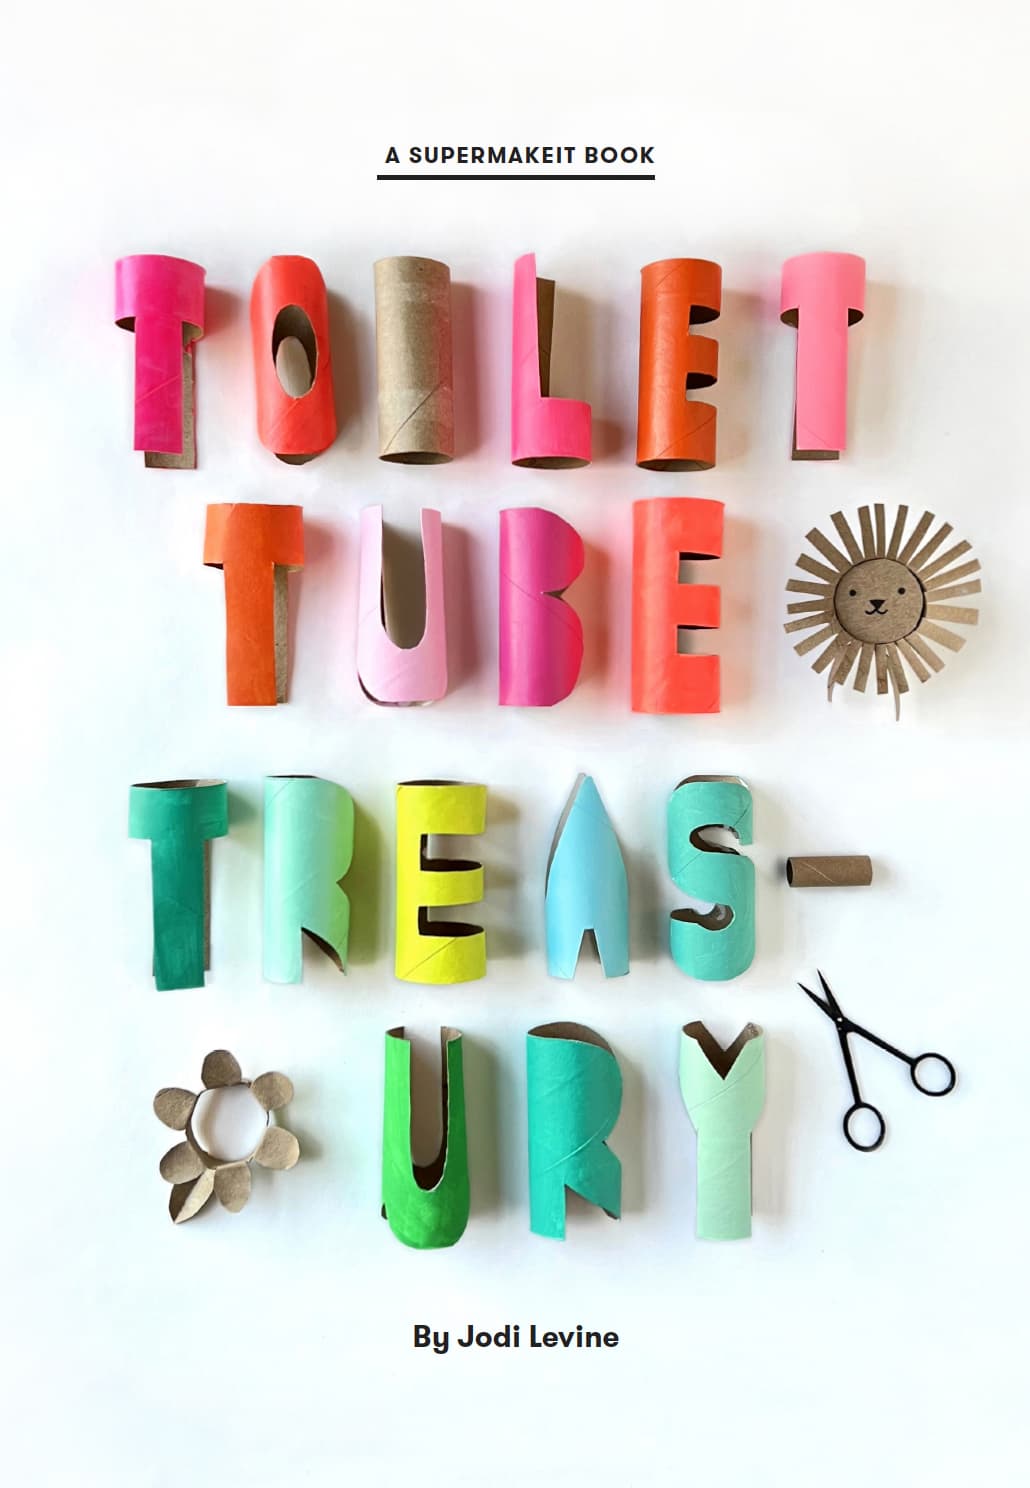 6 Crafts To Reuse Cardboard Tubes Story - Abbi Kirsten Collections